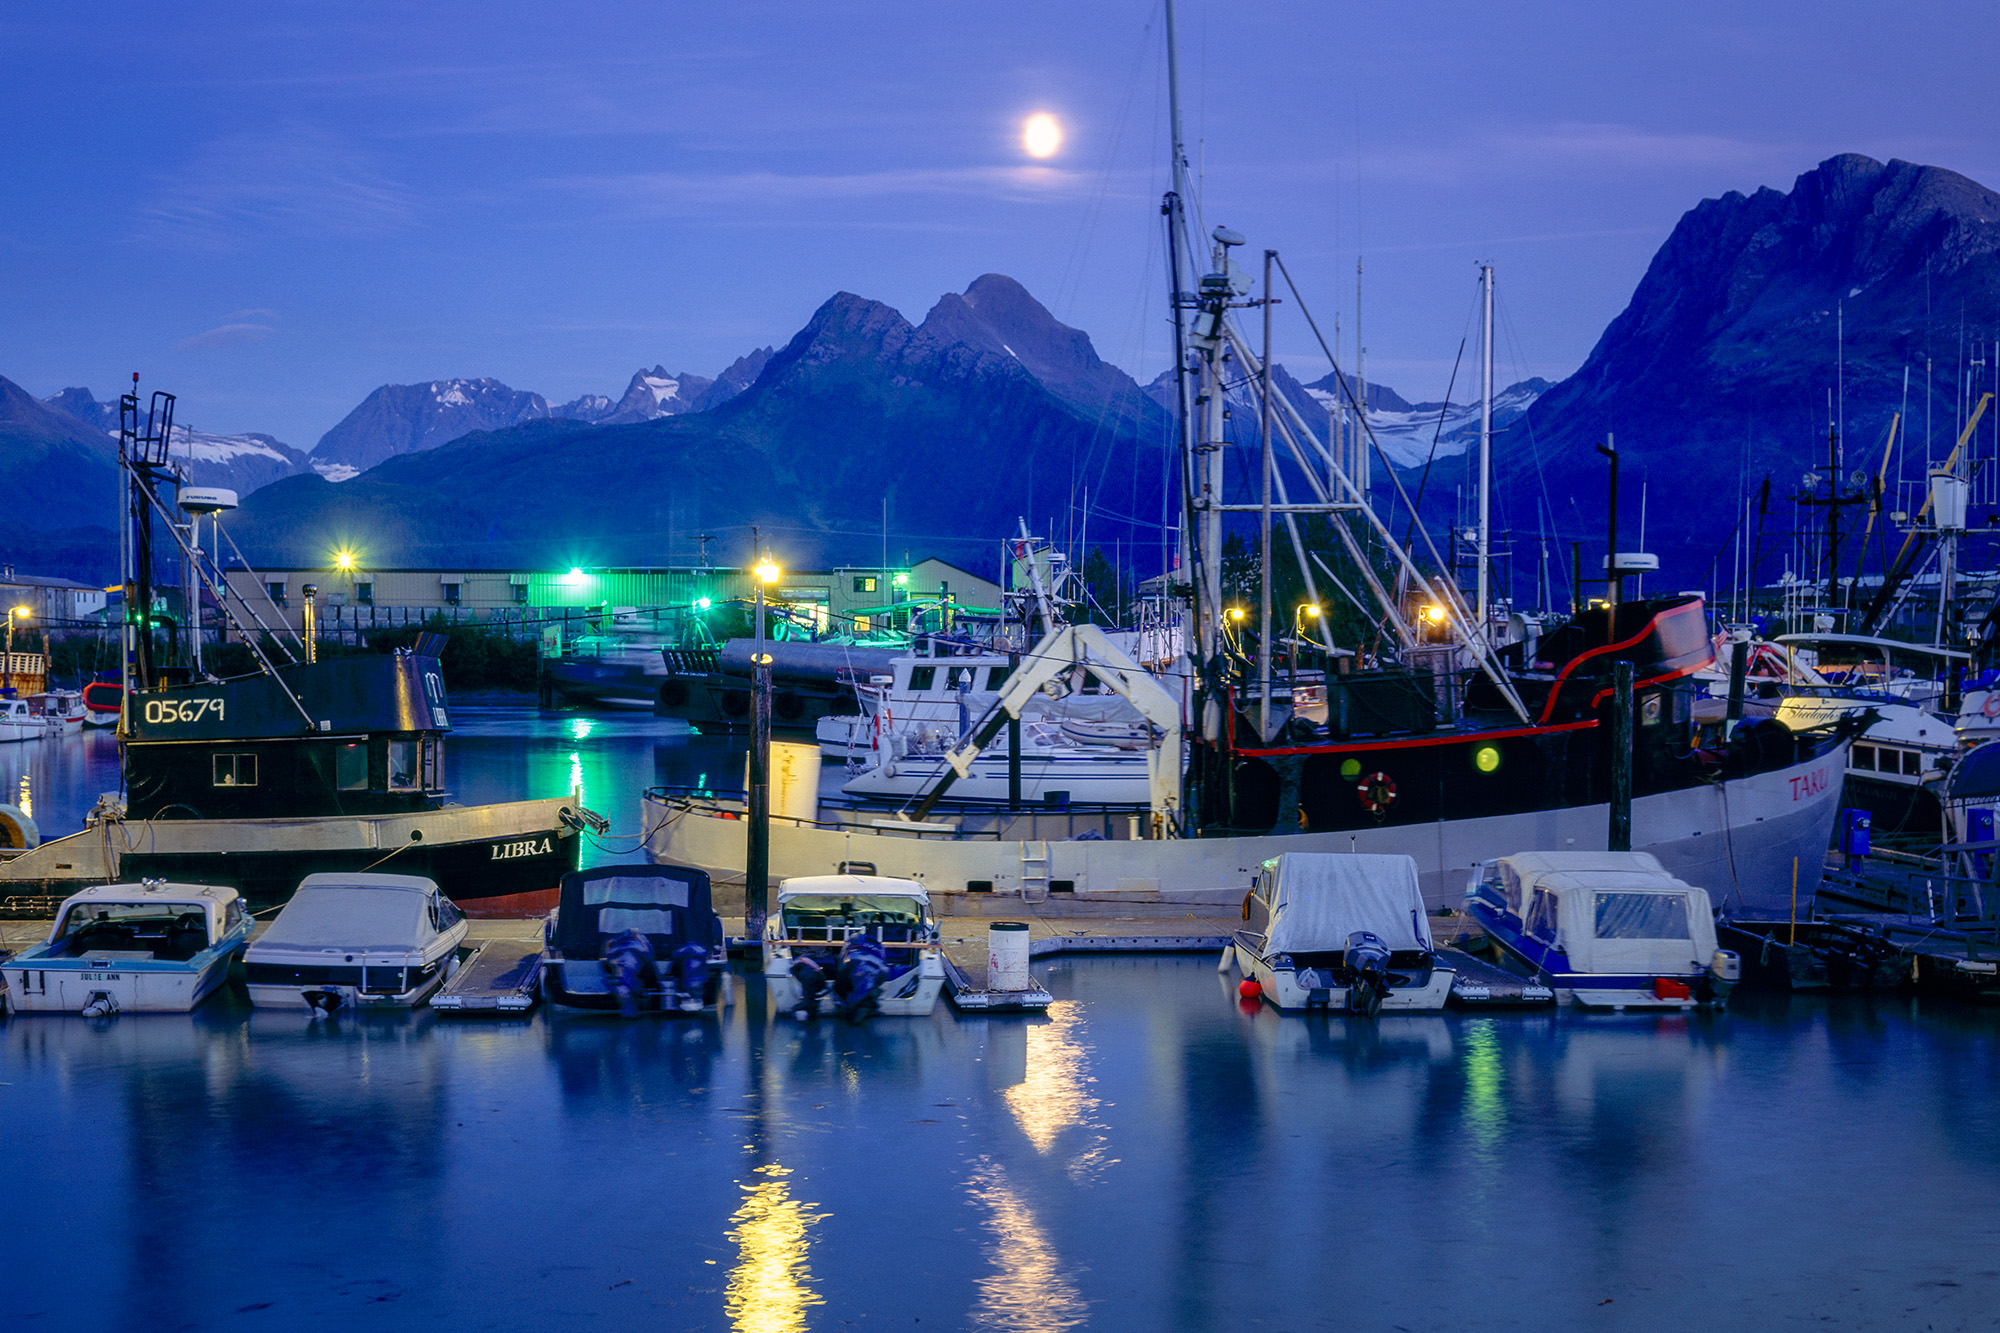 In the enchanting moments of blue hour, "Moonrise over Seward Harbor" transports you to the tranquil harbor of Seward, Alaska...